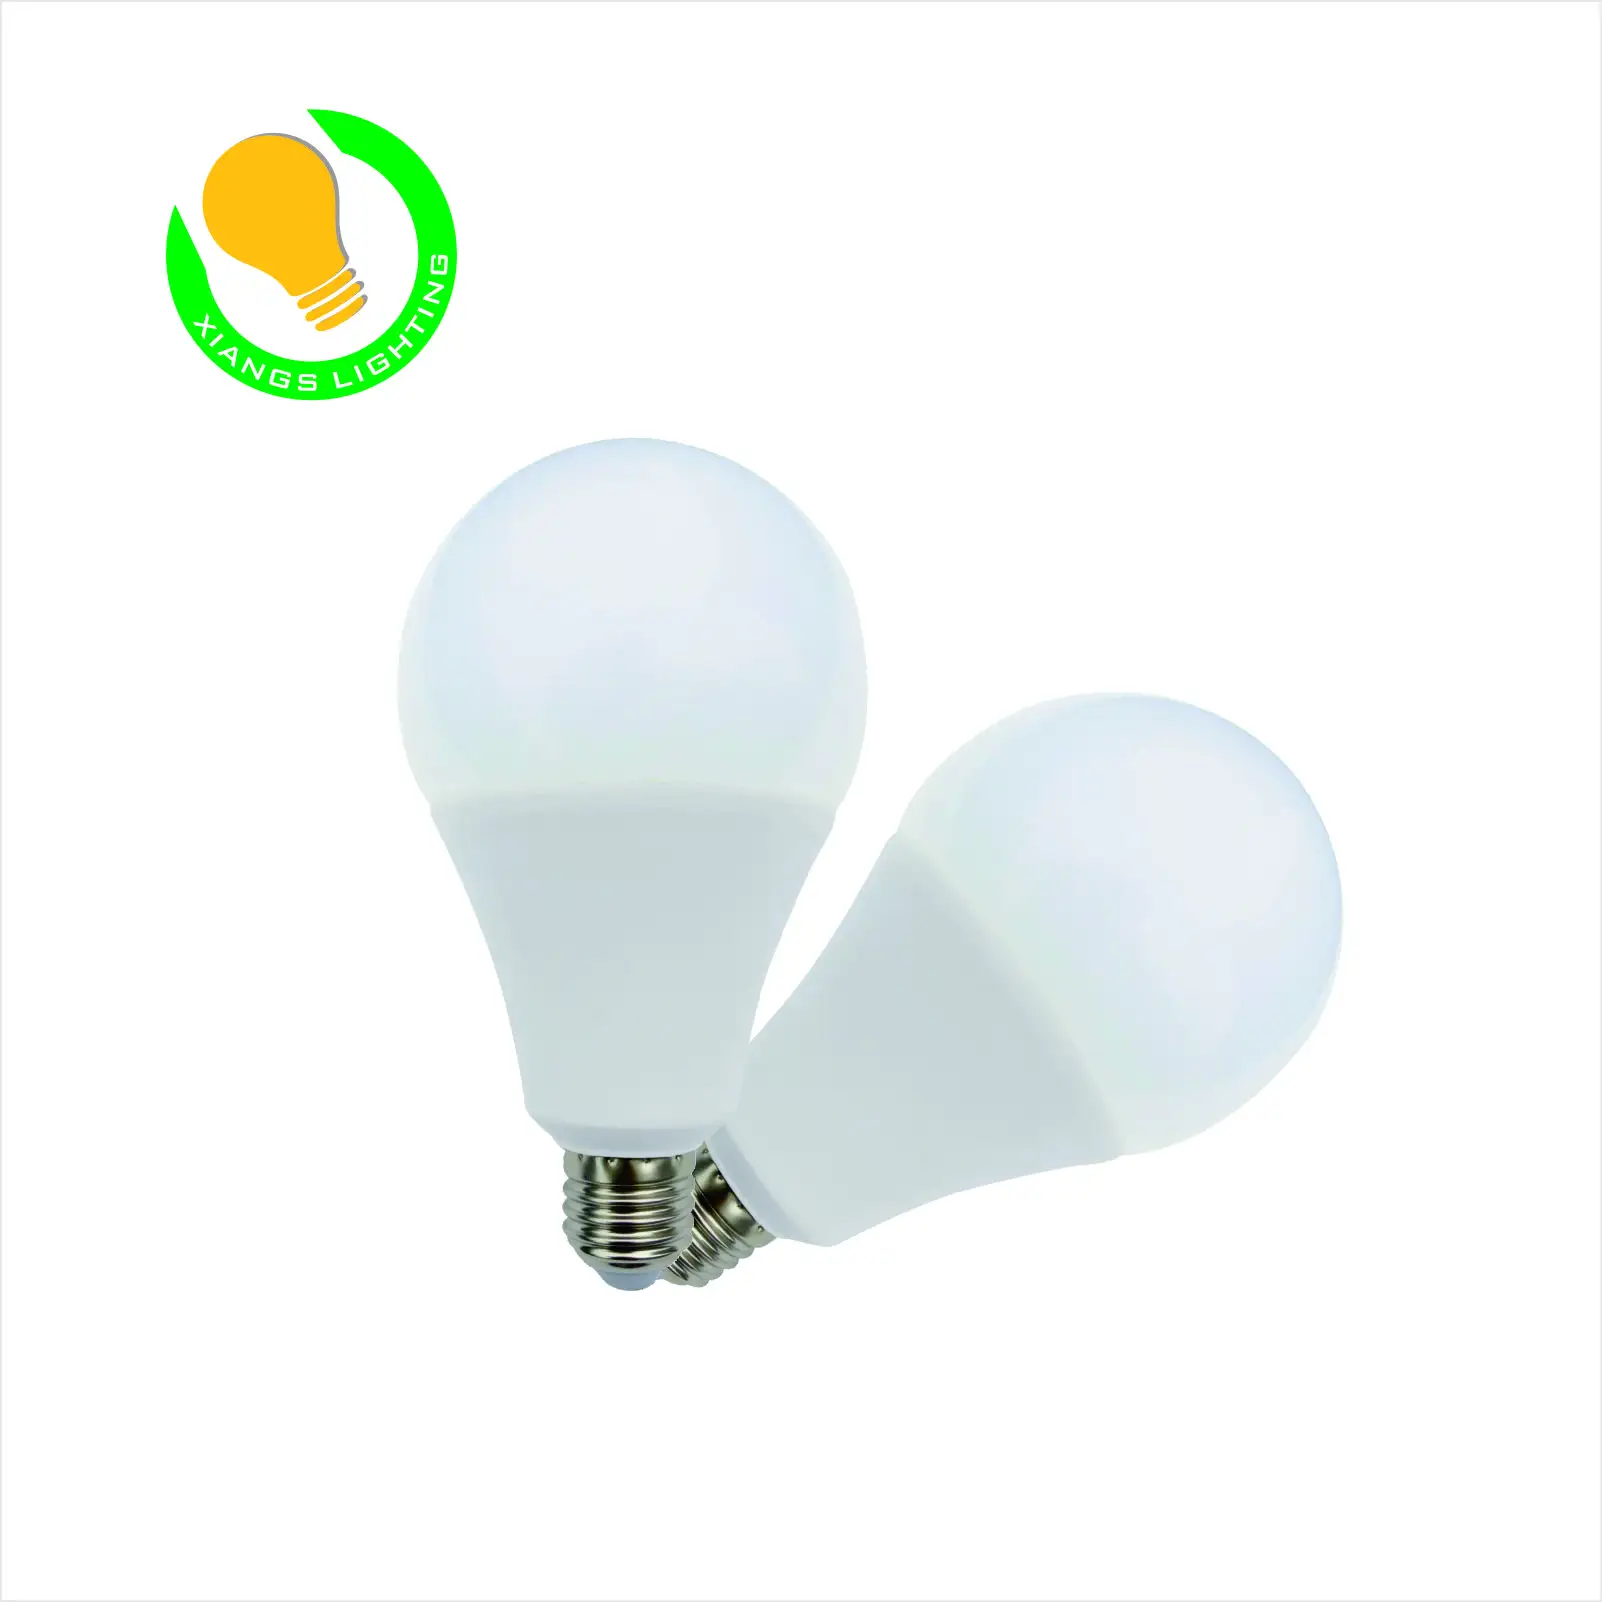 Wohn Lampada LED-Lampe Focos 3W 5W 7W 9W 12W 15W 18W 24W E27 B22 Lampe Licht Material LED-Lampe